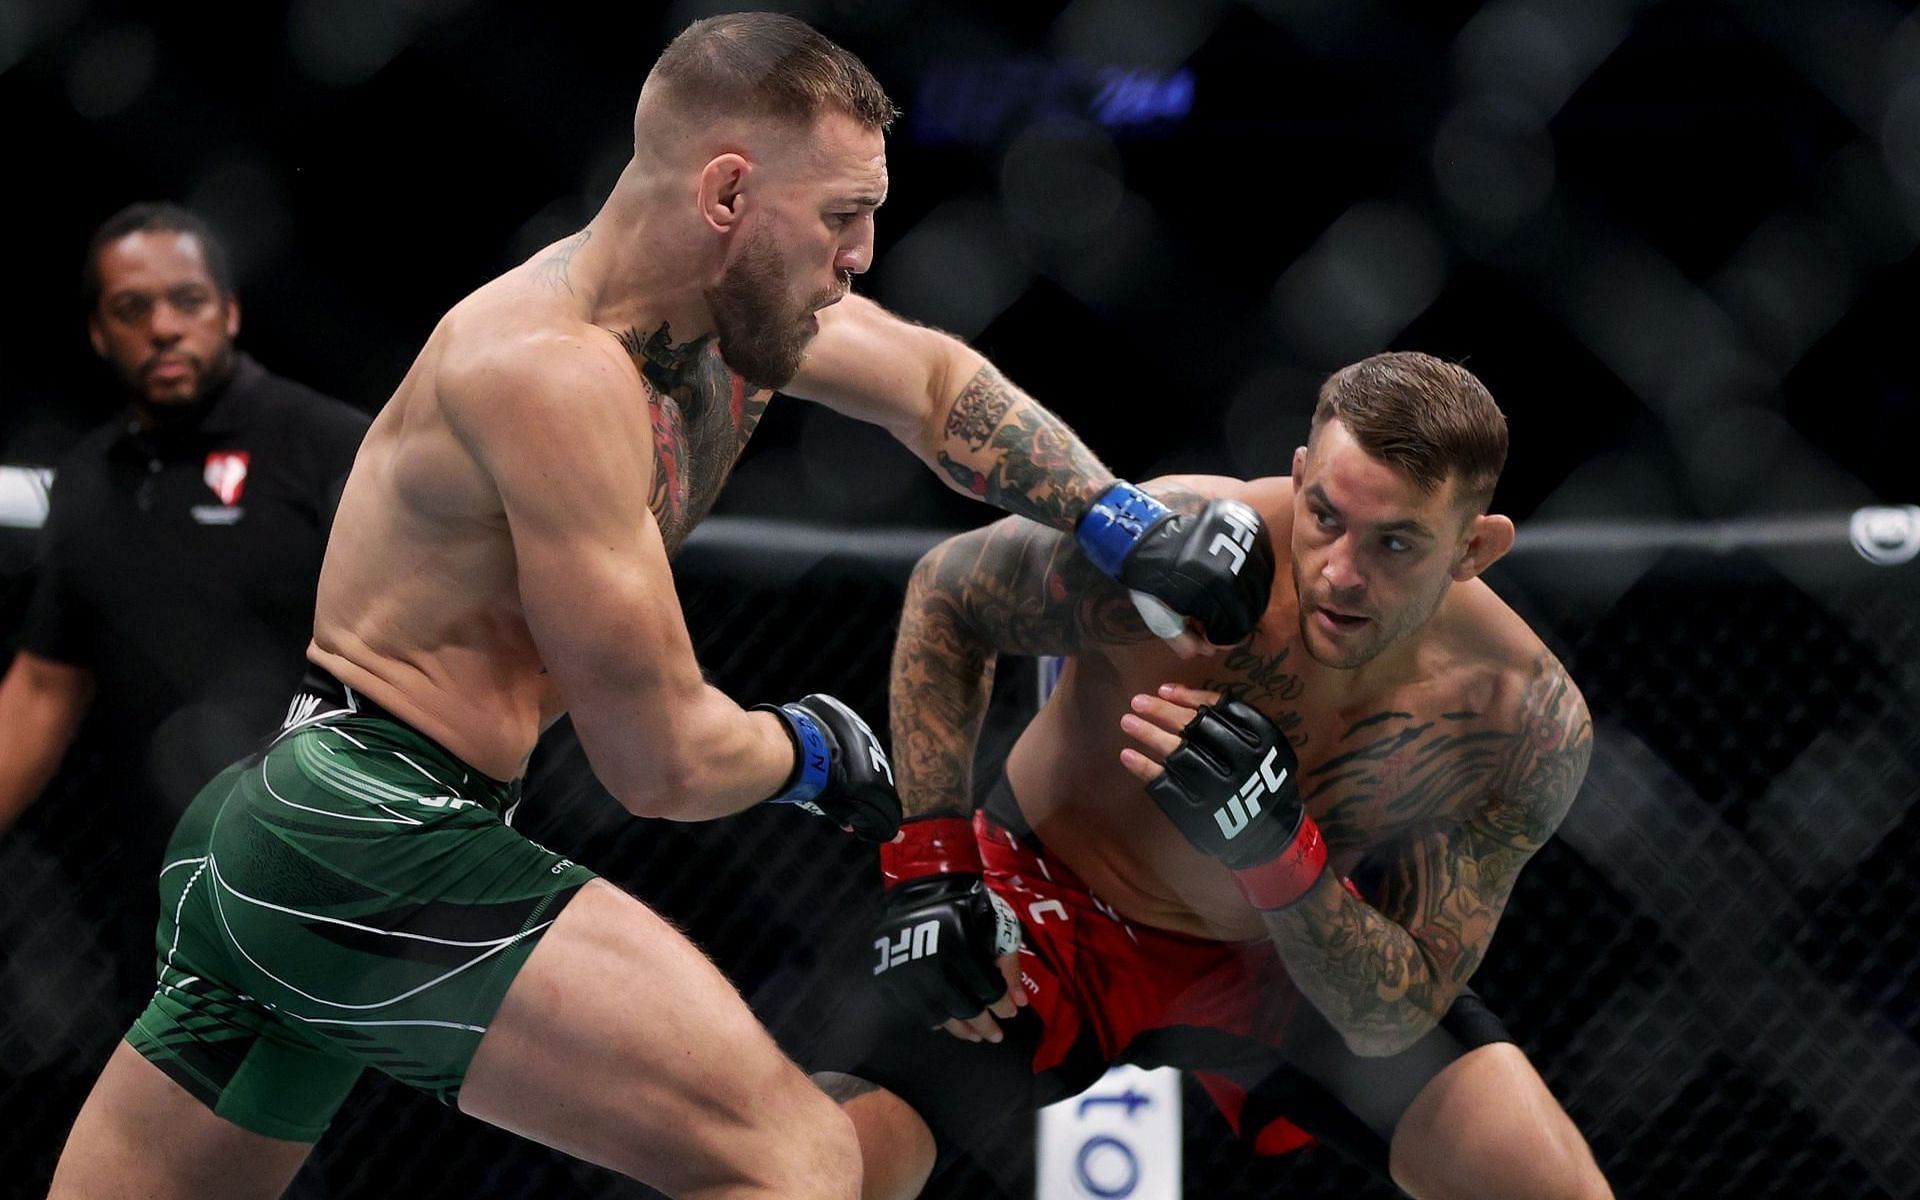 Dustin Poirier is hoping that the UFC to books a fight against Conor McGregor